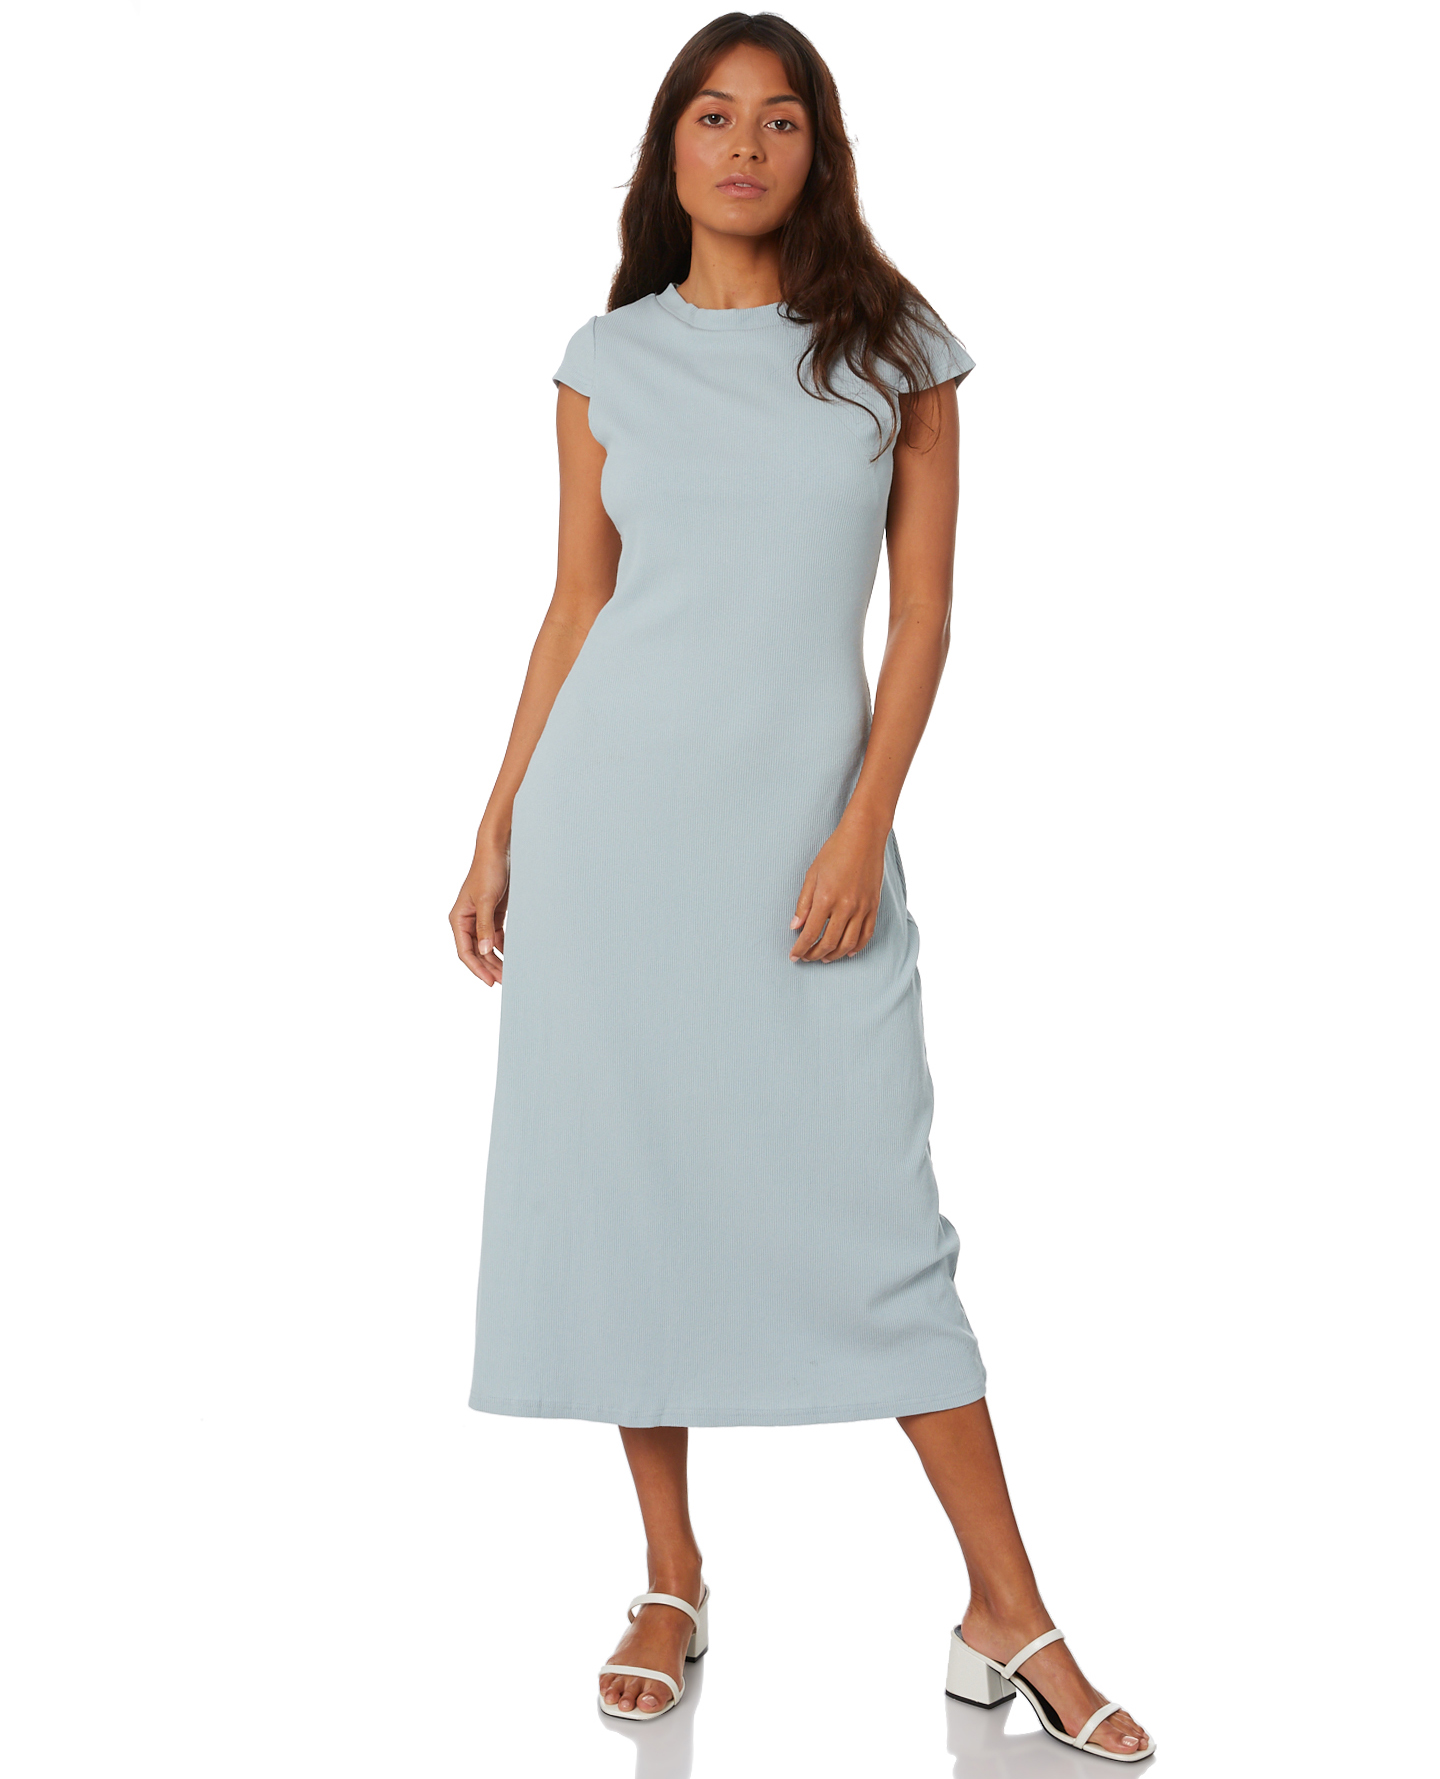 Toby Heart Ginger Miami Knit Dress - Blue | SurfStitch